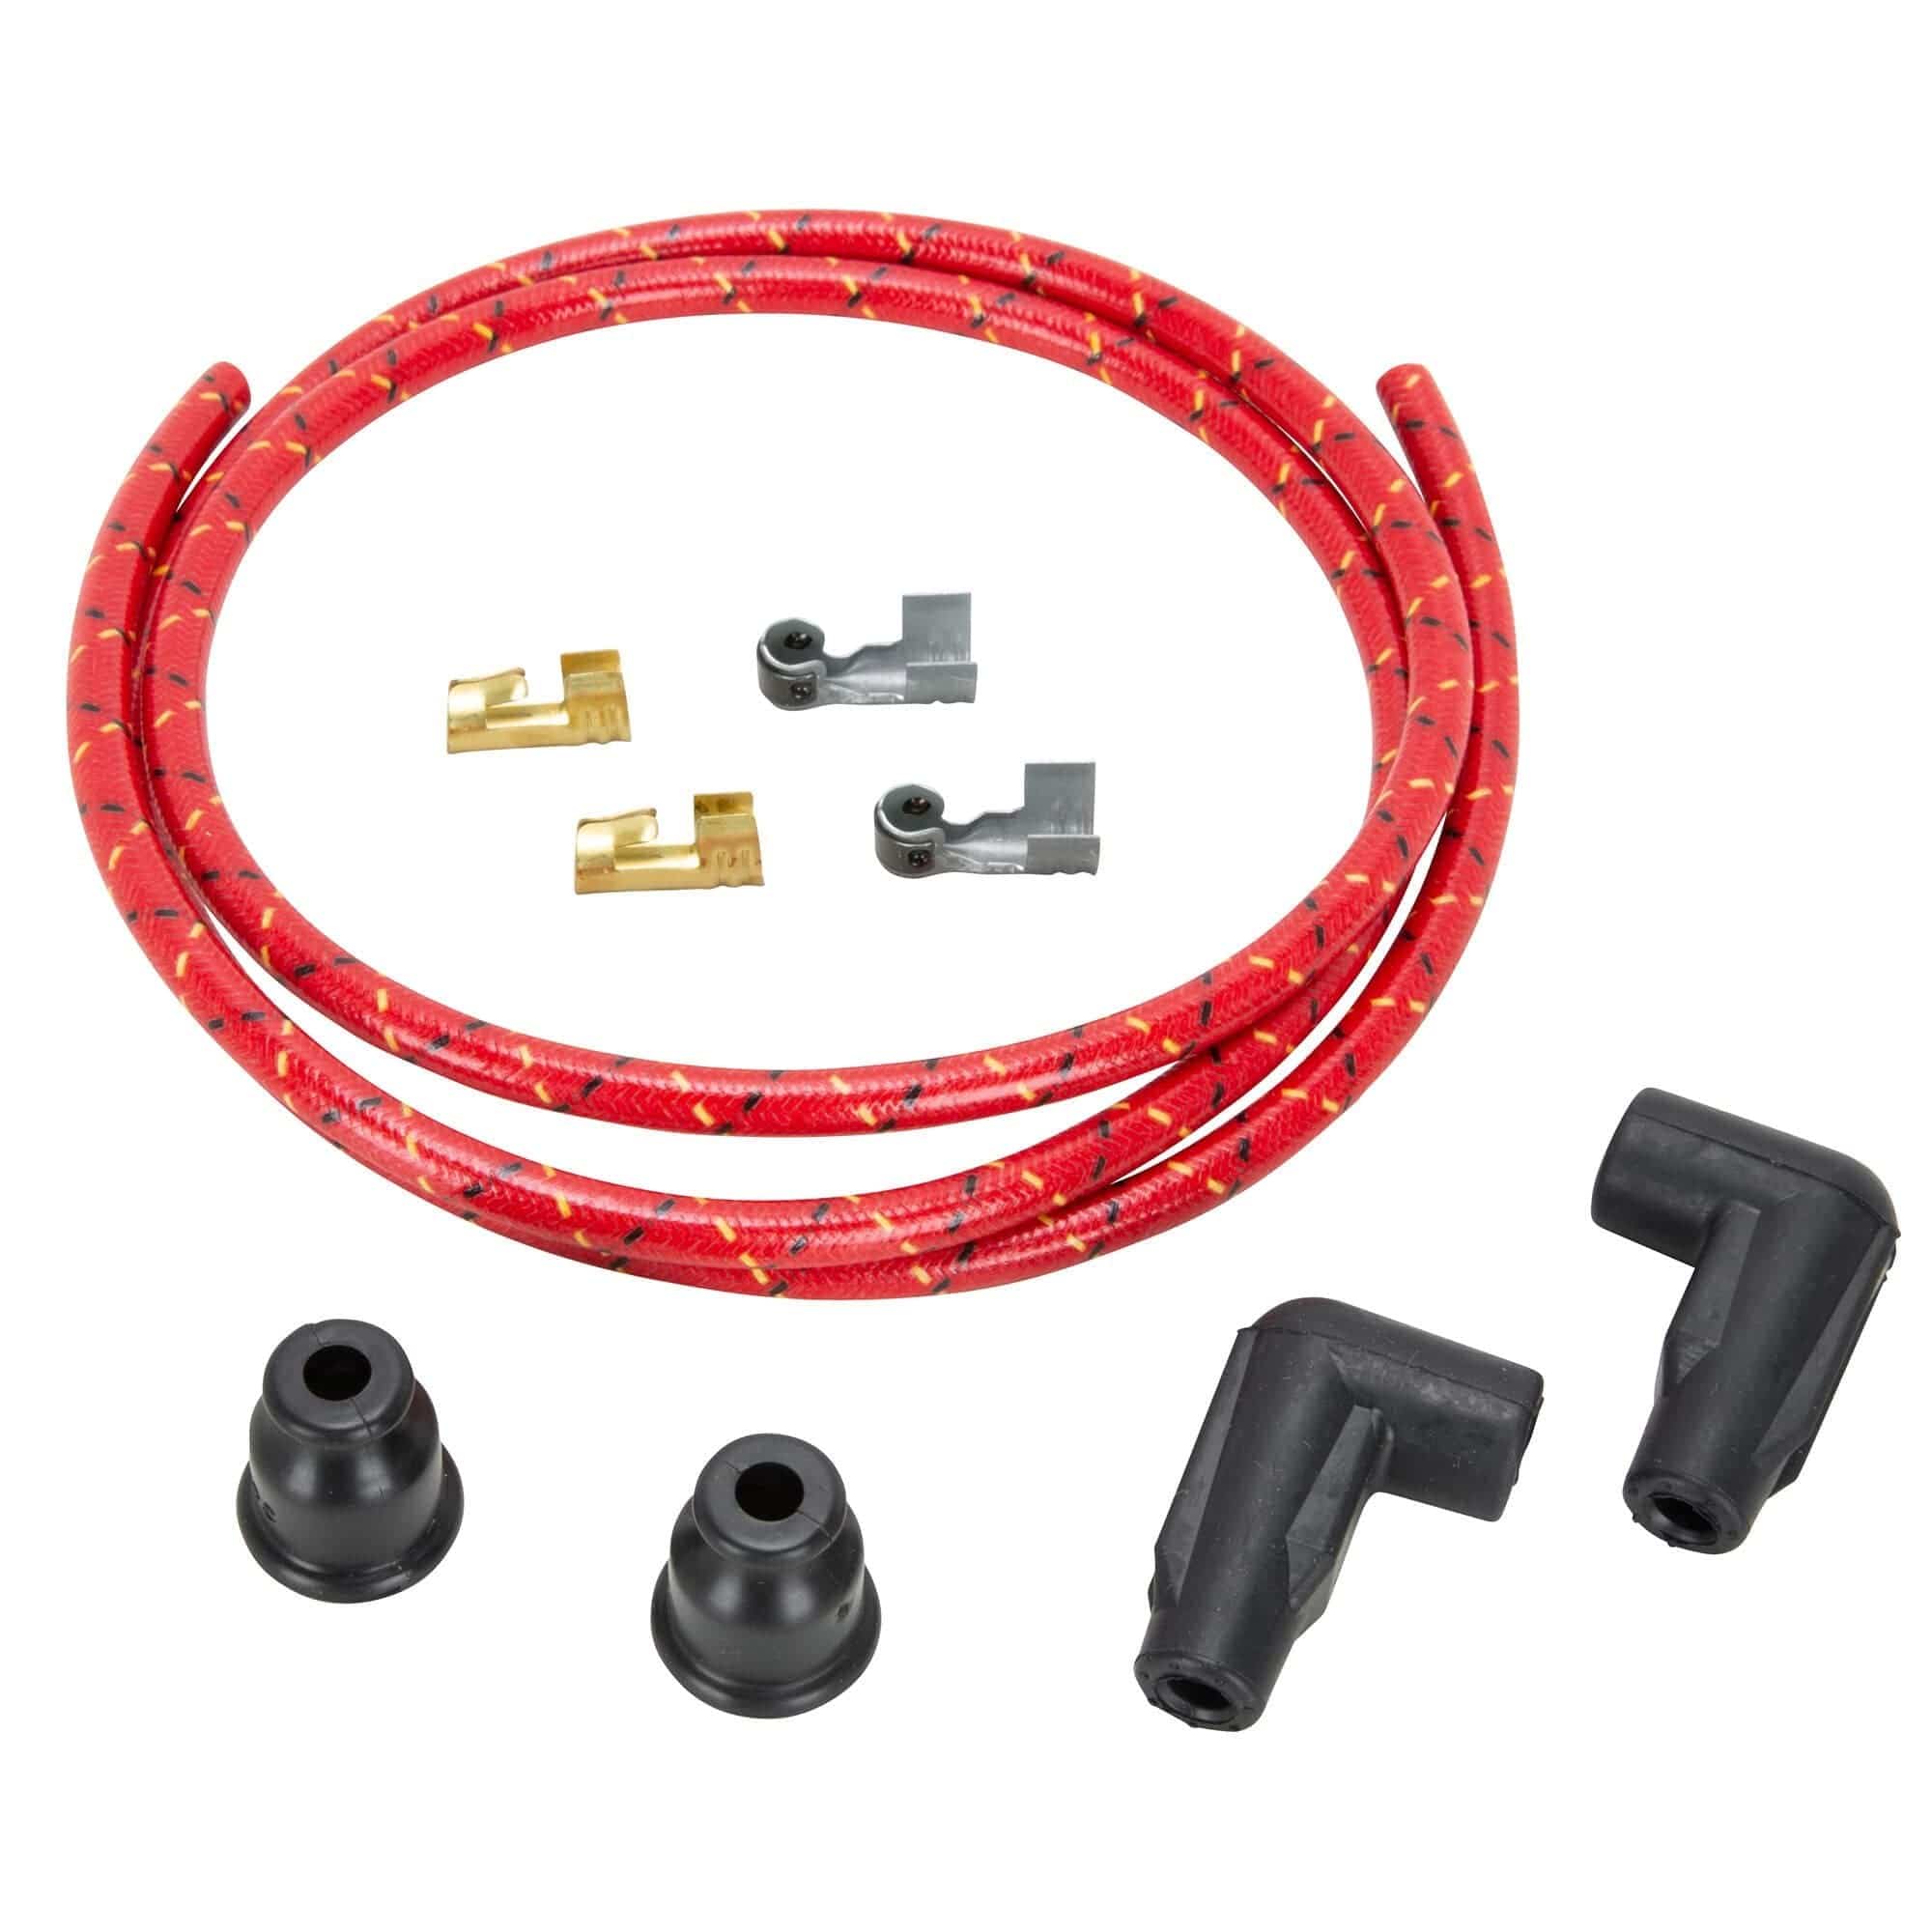 Lowbrow Customs 7mm Cloth 90 Degree Spark Plug Wire Sets - Red w